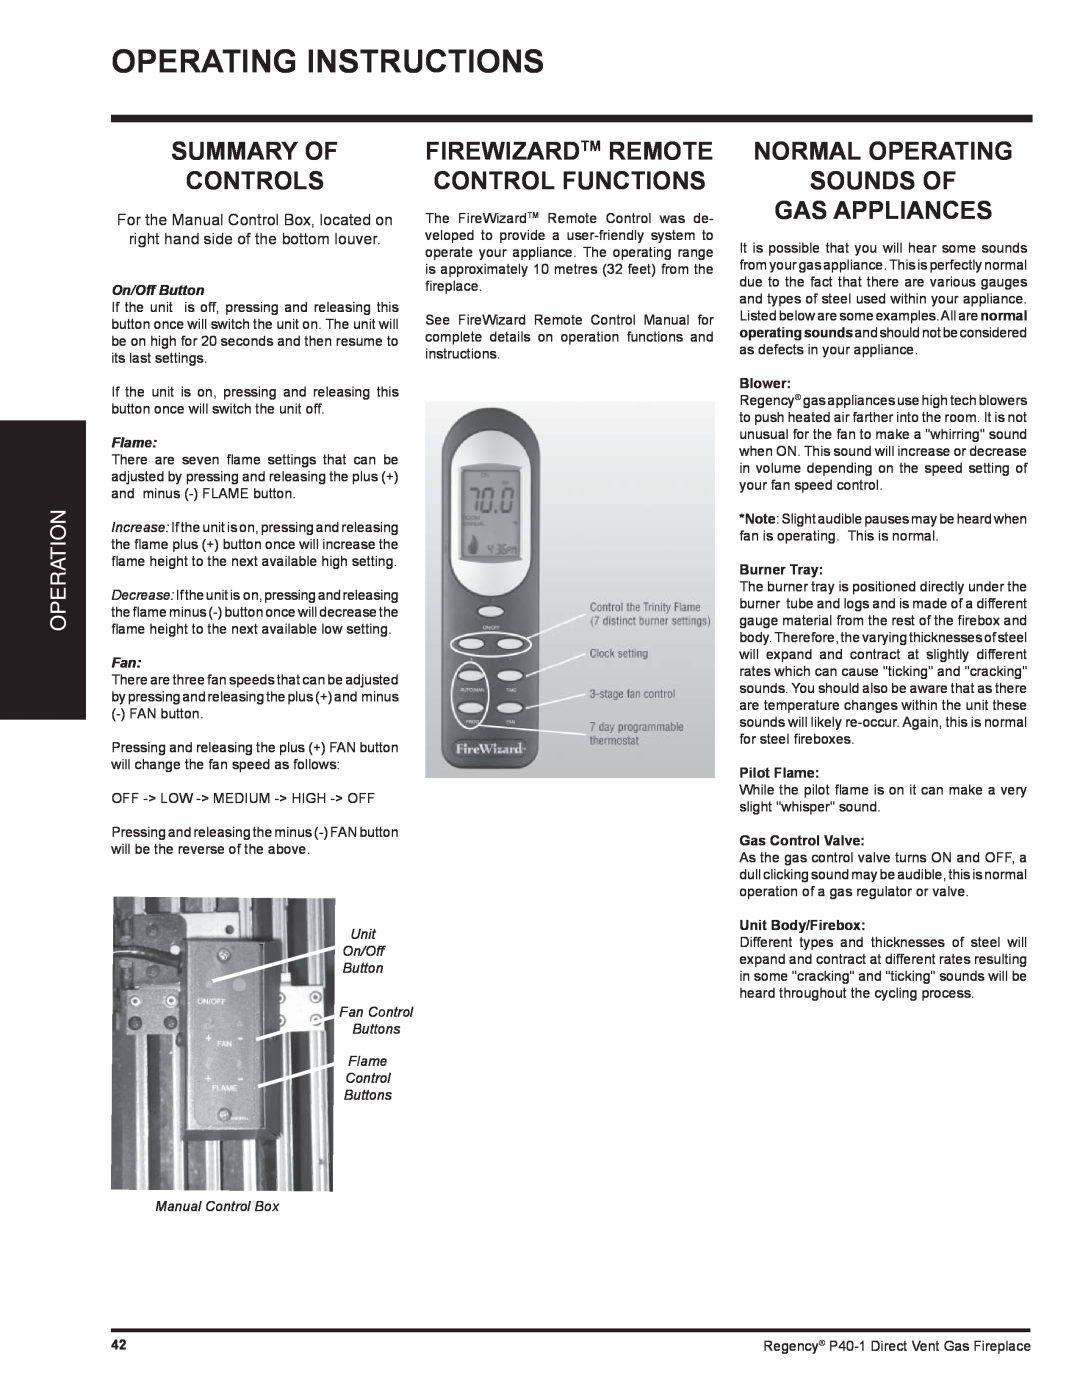 Regency P40-NG1 Summary Of Controls, Normal Operating Sounds Of Gas Appliances, Firewizardtm Remote Control Functions 